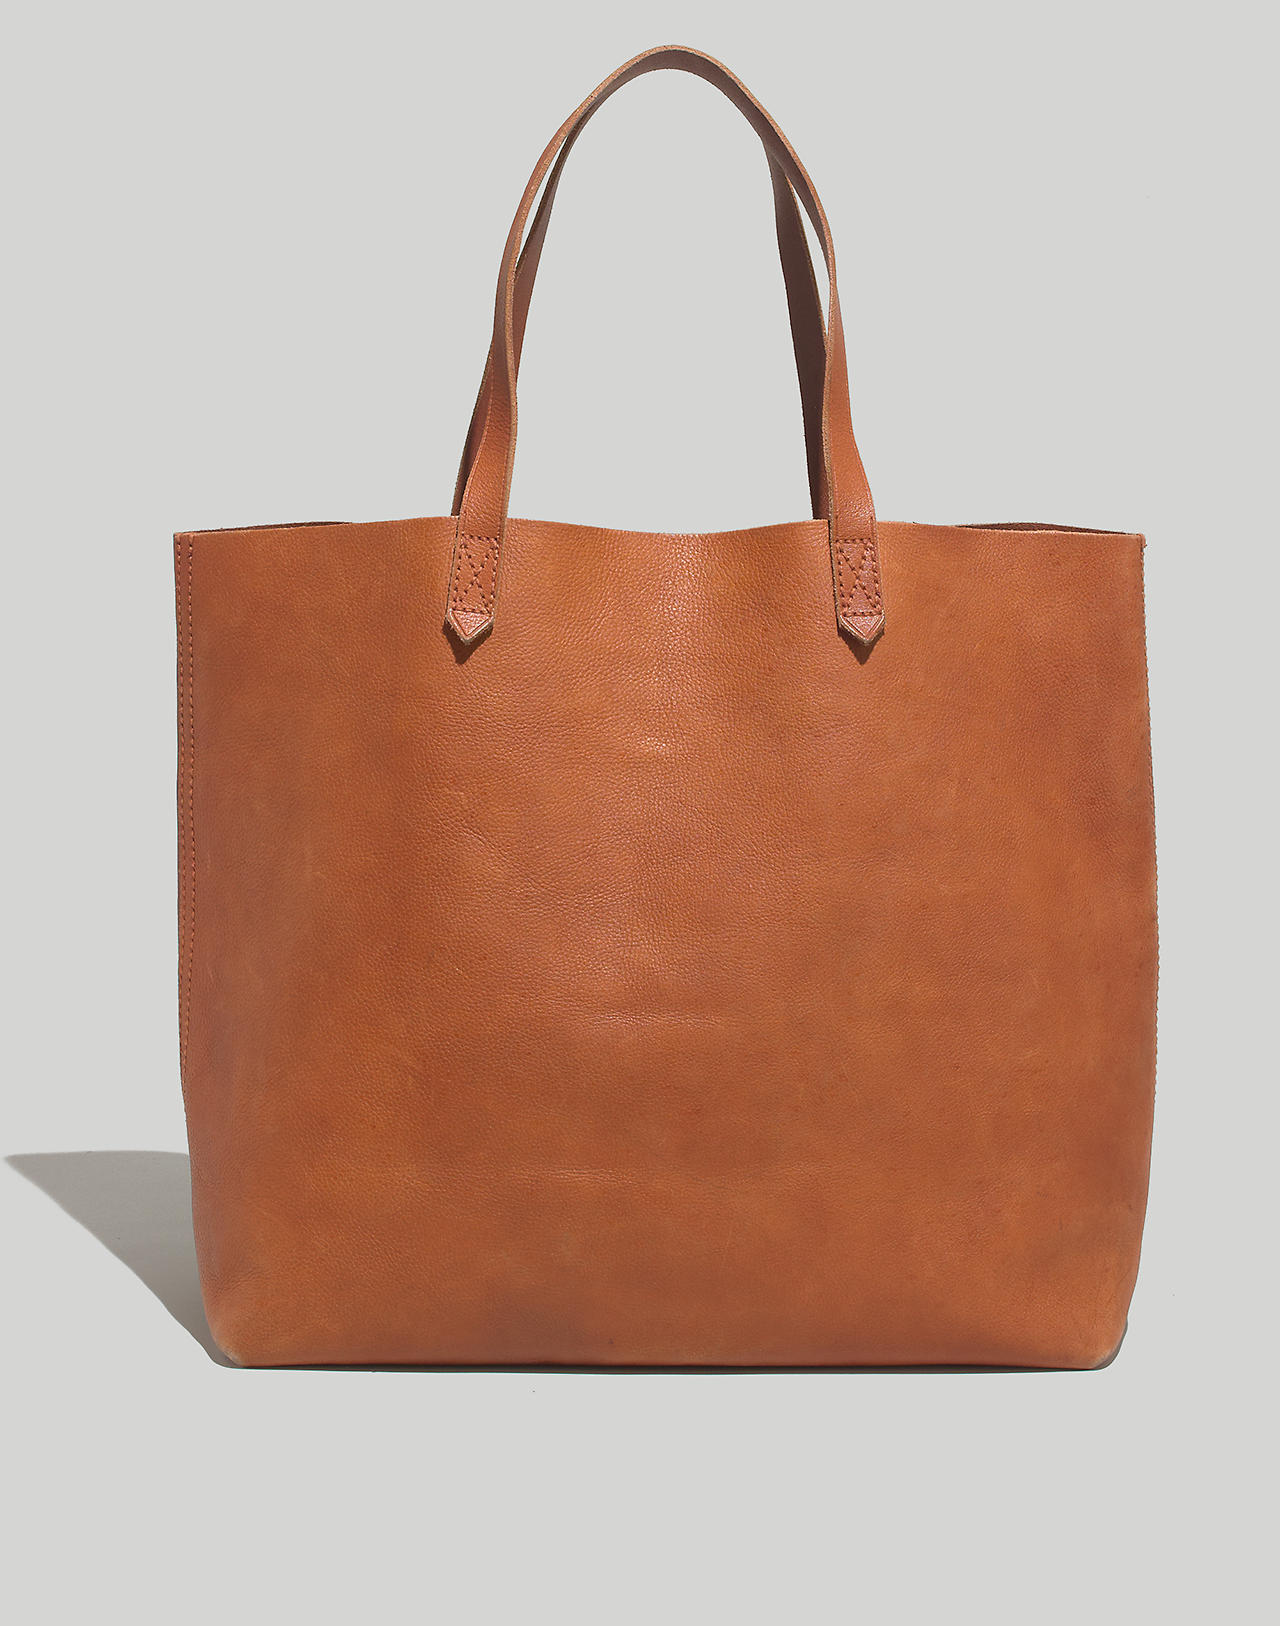 Editor's Pick: Best Classic Tote Bags To Buy Now – Ferbena.com